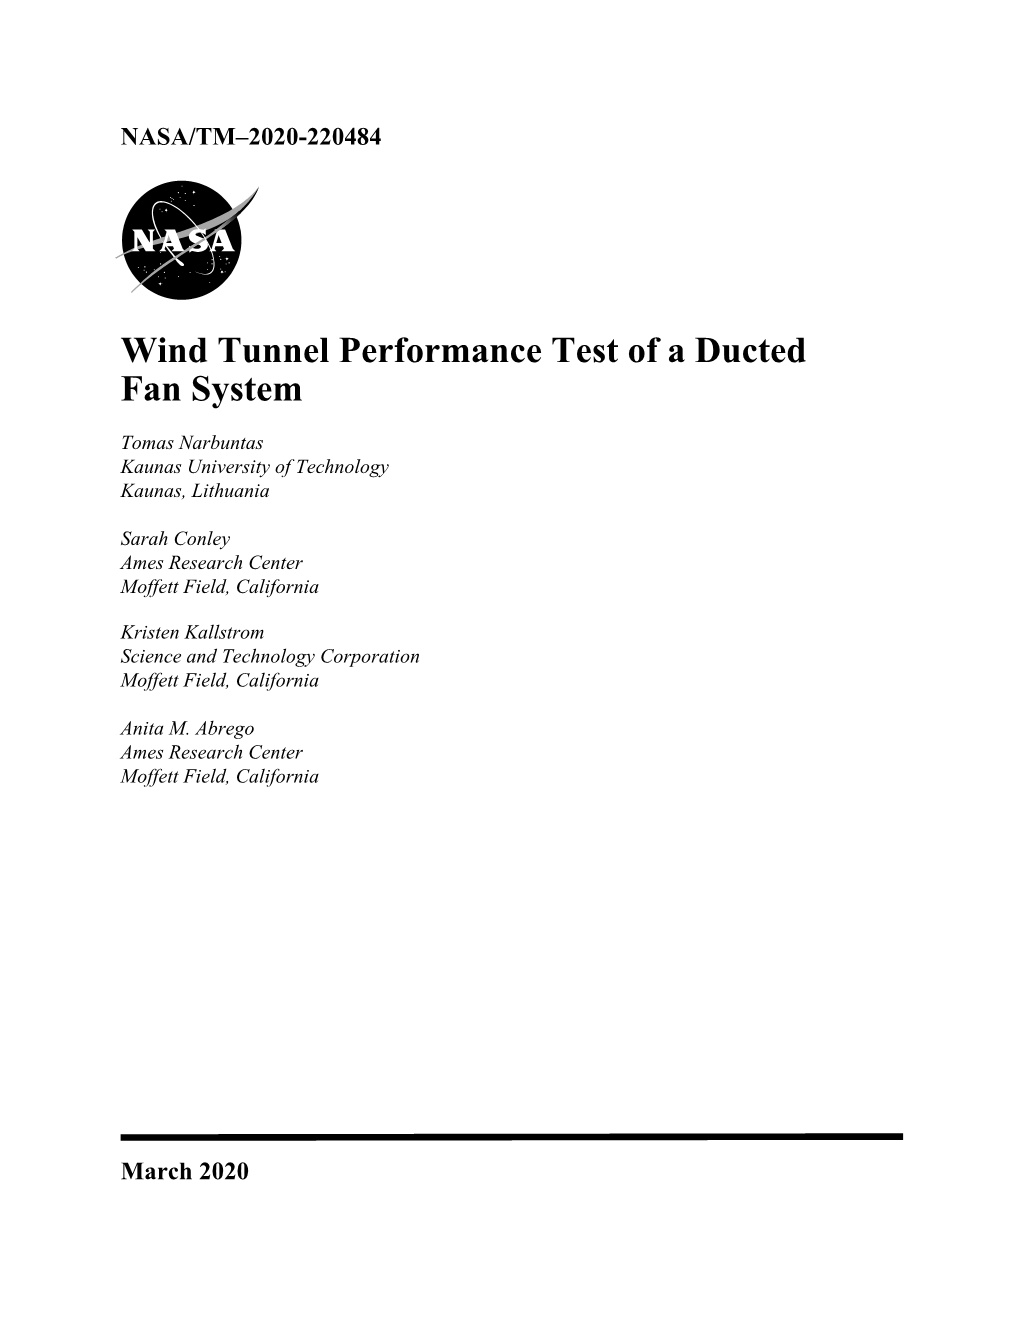 Wind Tunnel Performance Test of a Ducted Fan System